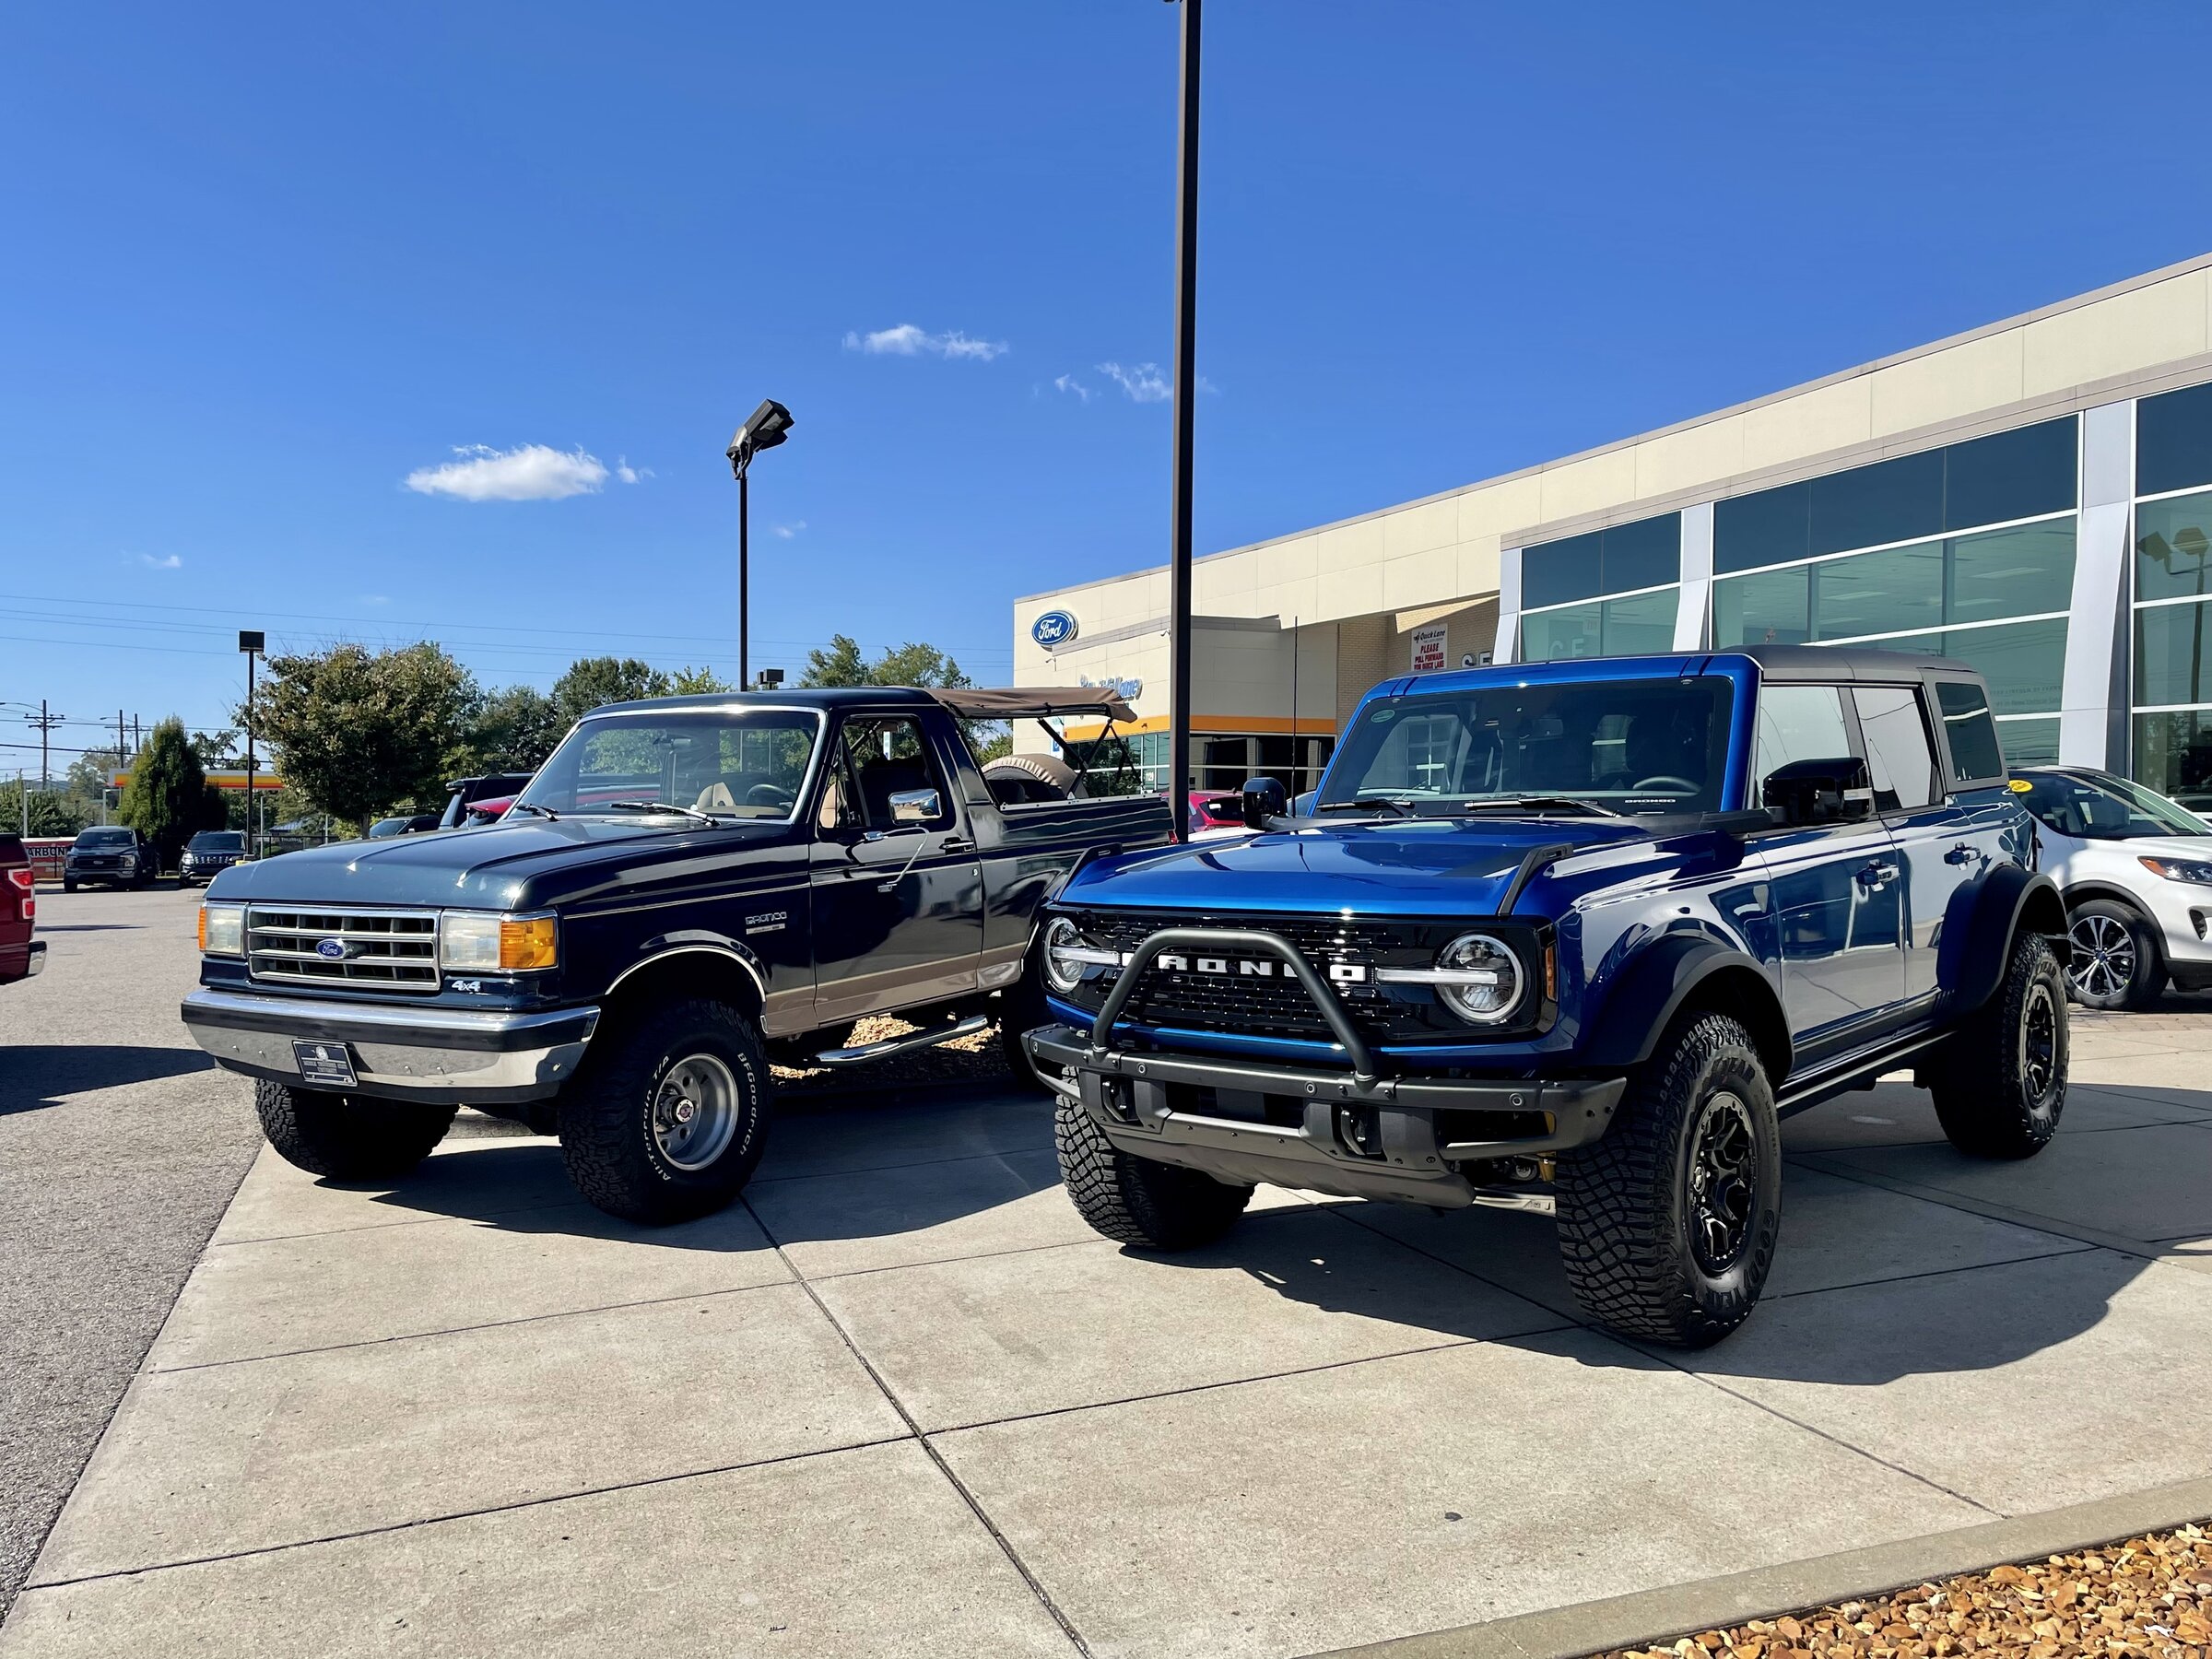 Ford Bronco Finally Took Delivery!!! Wildtrak Joins Blue Fords 833AEA9F-7C61-4164-A4AE-7A6D9A90FC72